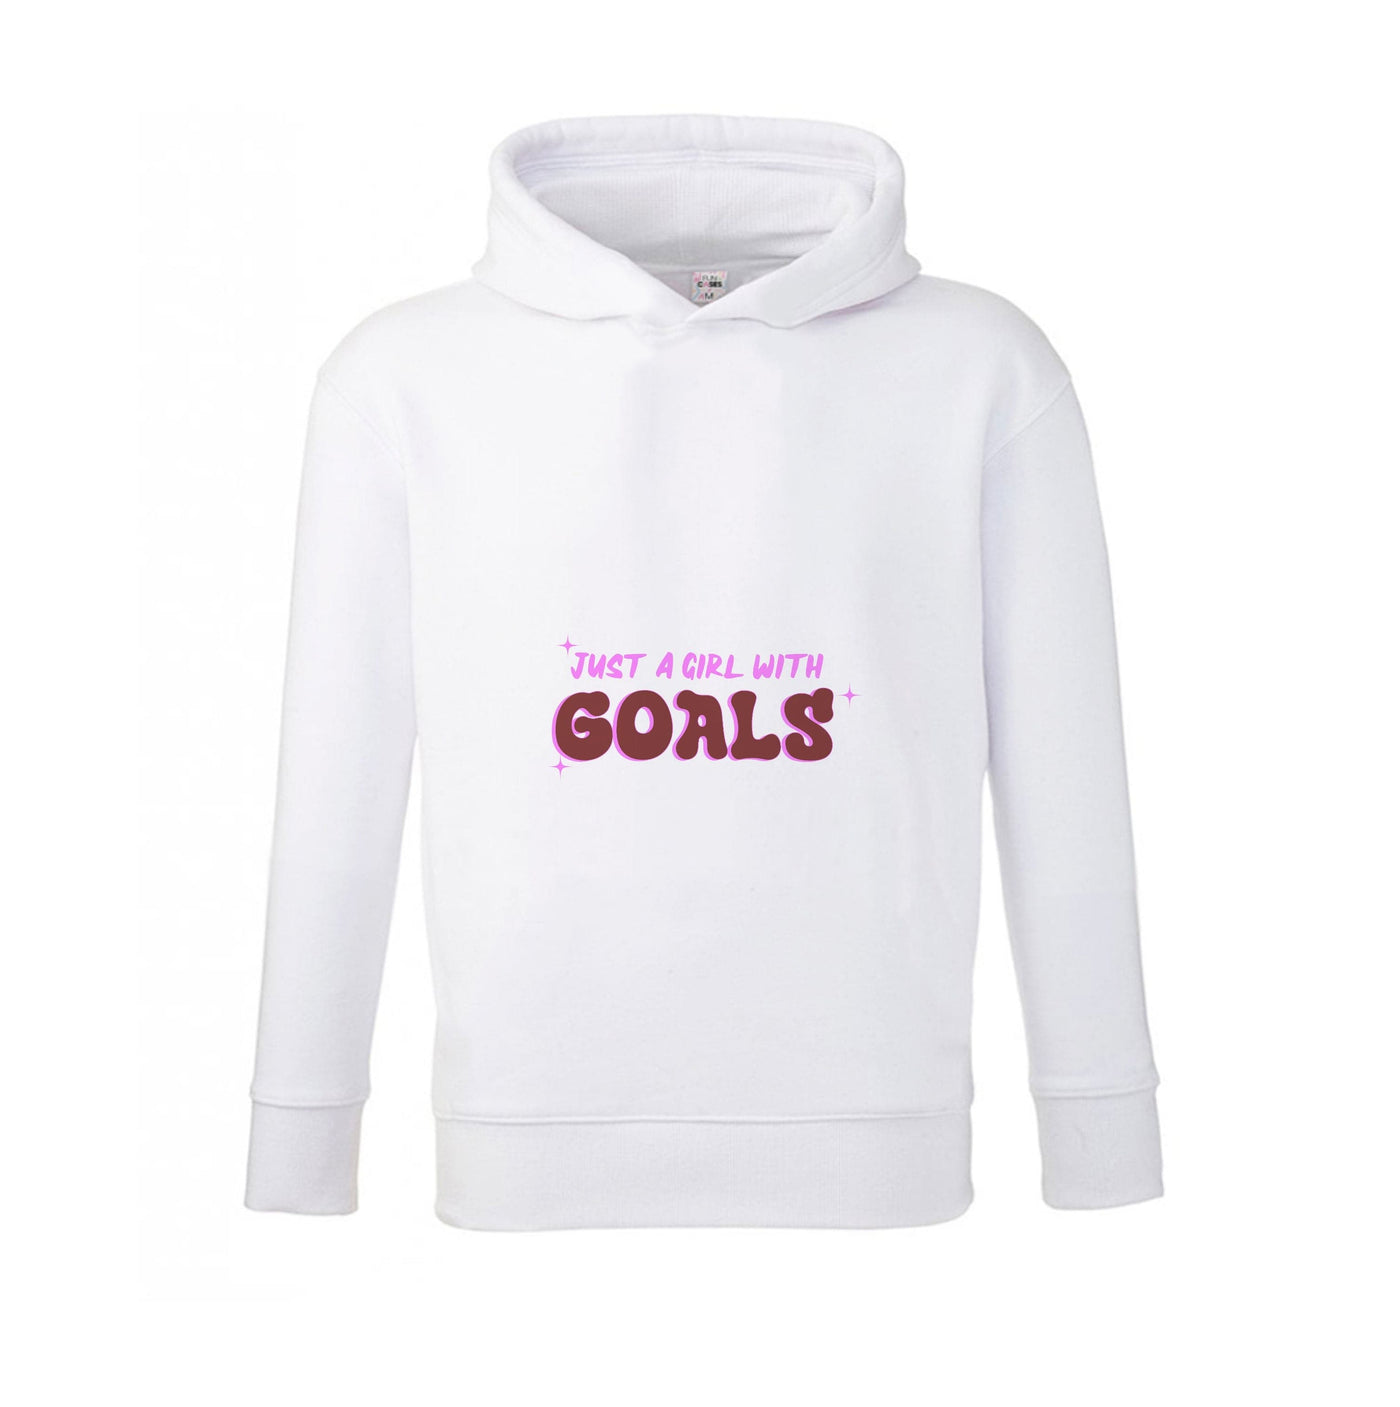 Just A Girl With Goals - Aesthetic Quote Kids Hoodie